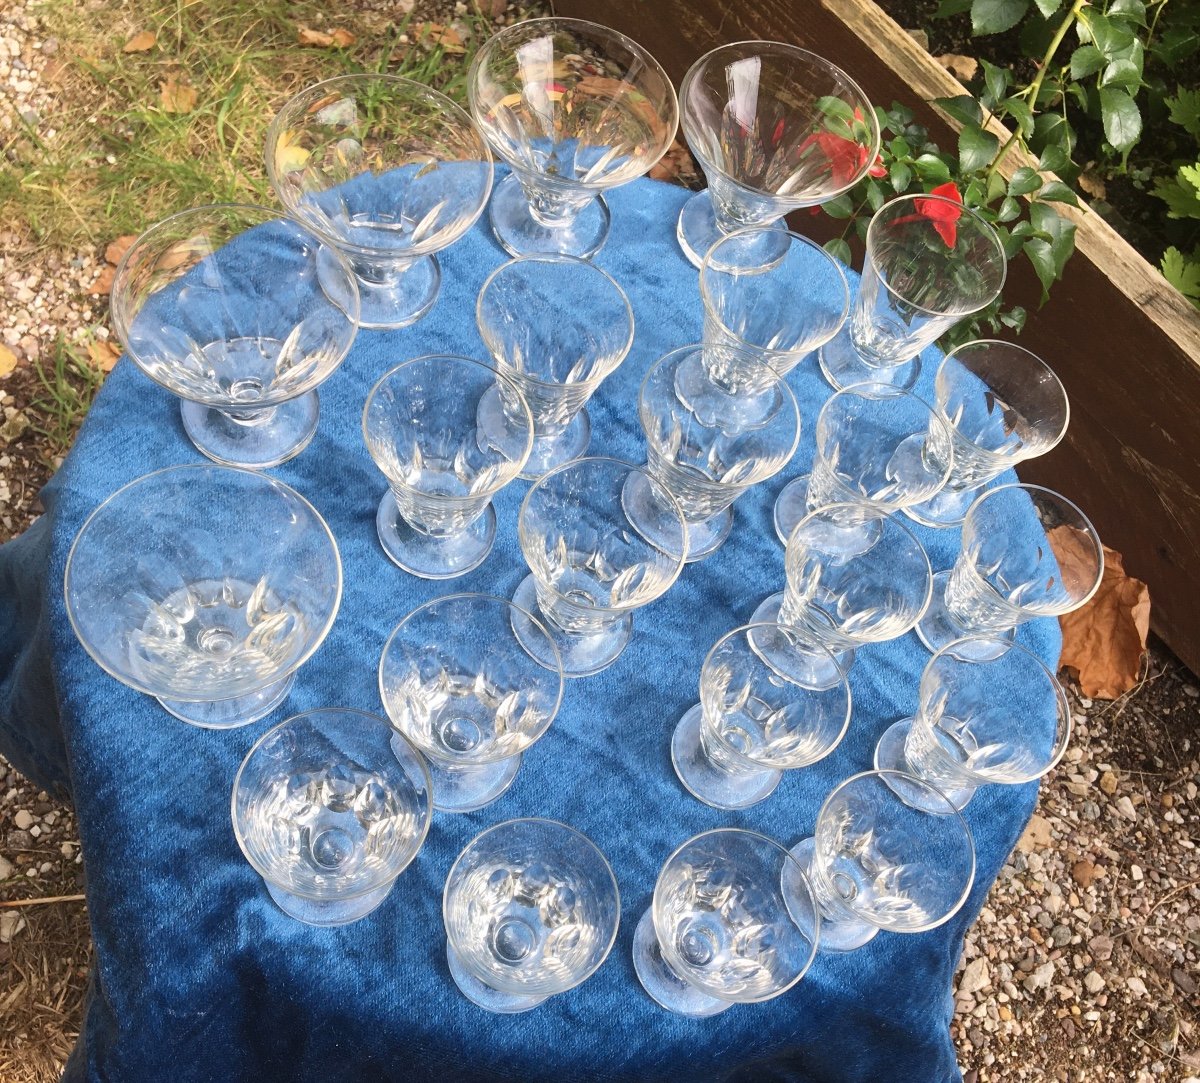 The 17 Art Deco Crystal Glasses-photo-8